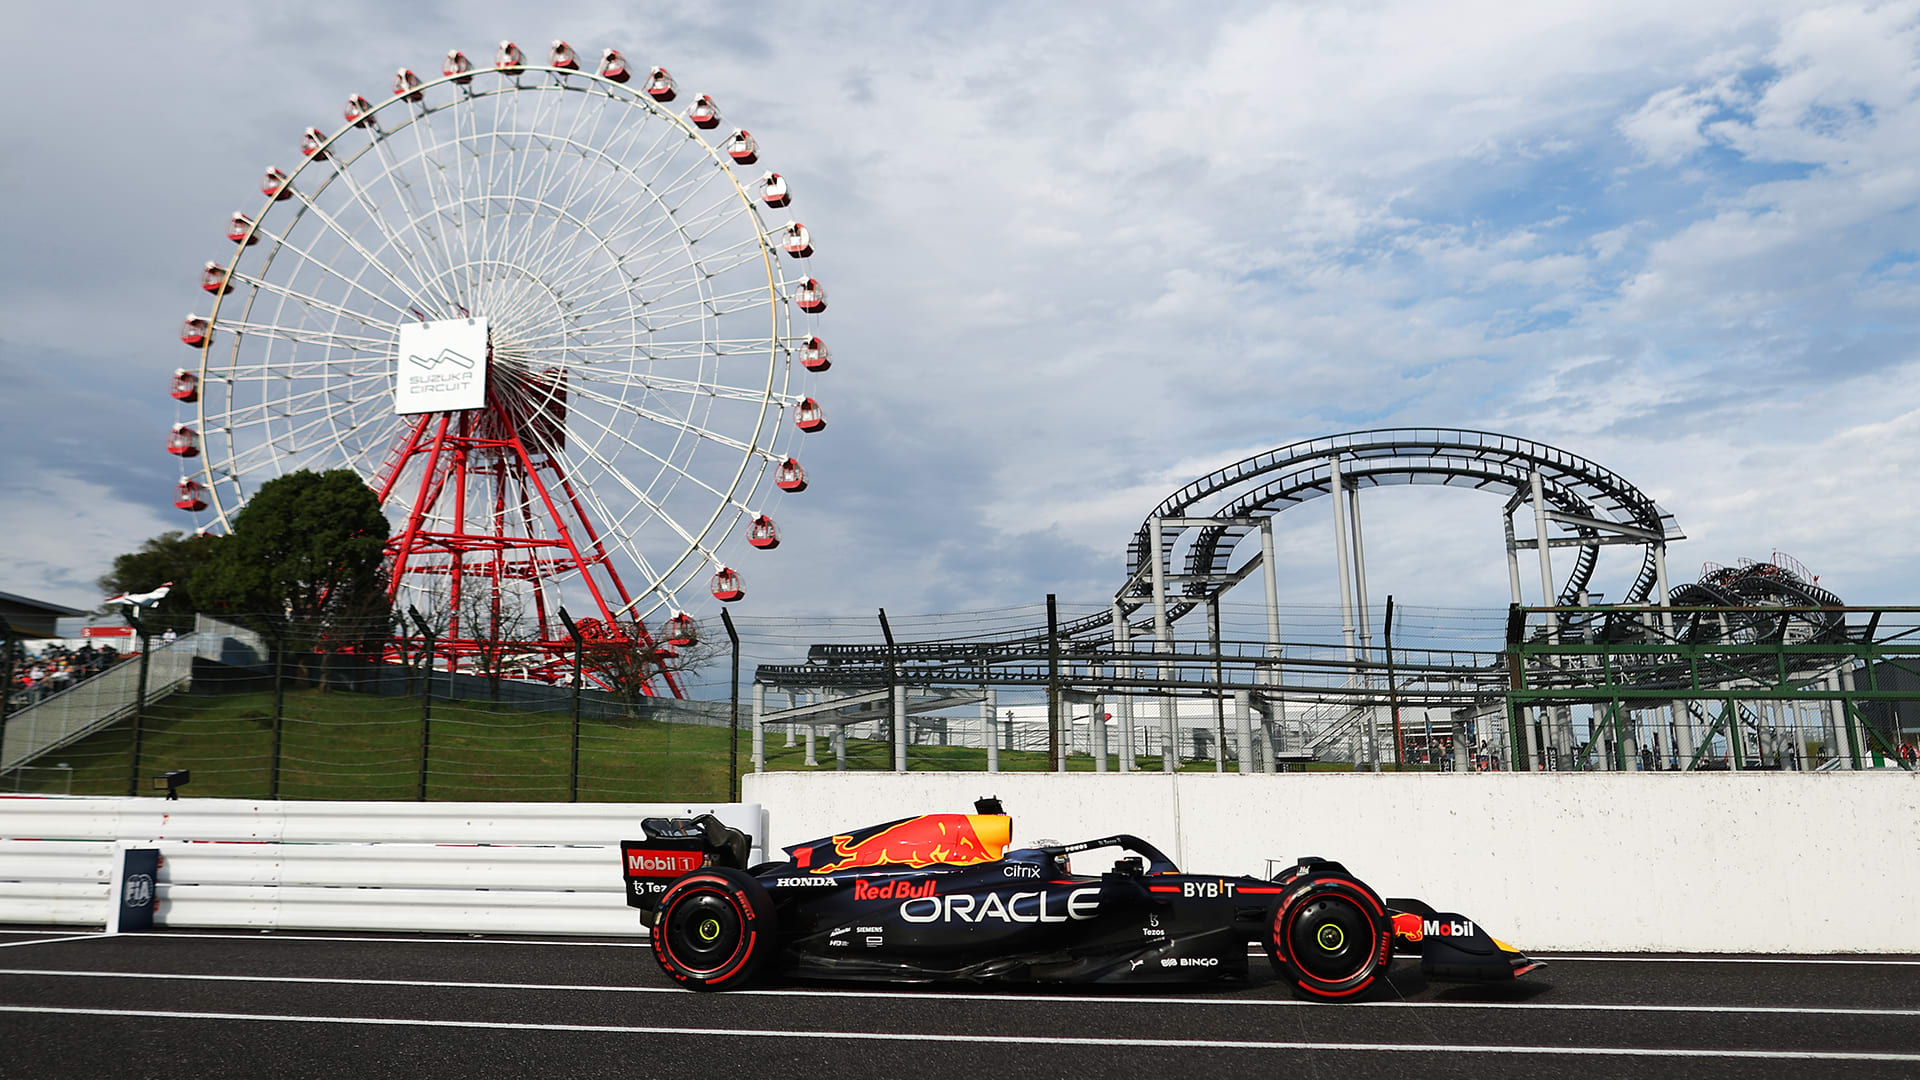 ITS RACE WEEK 5 storylines were excited about ahead of the 2023 Japanese Grand Prix Formula 1®